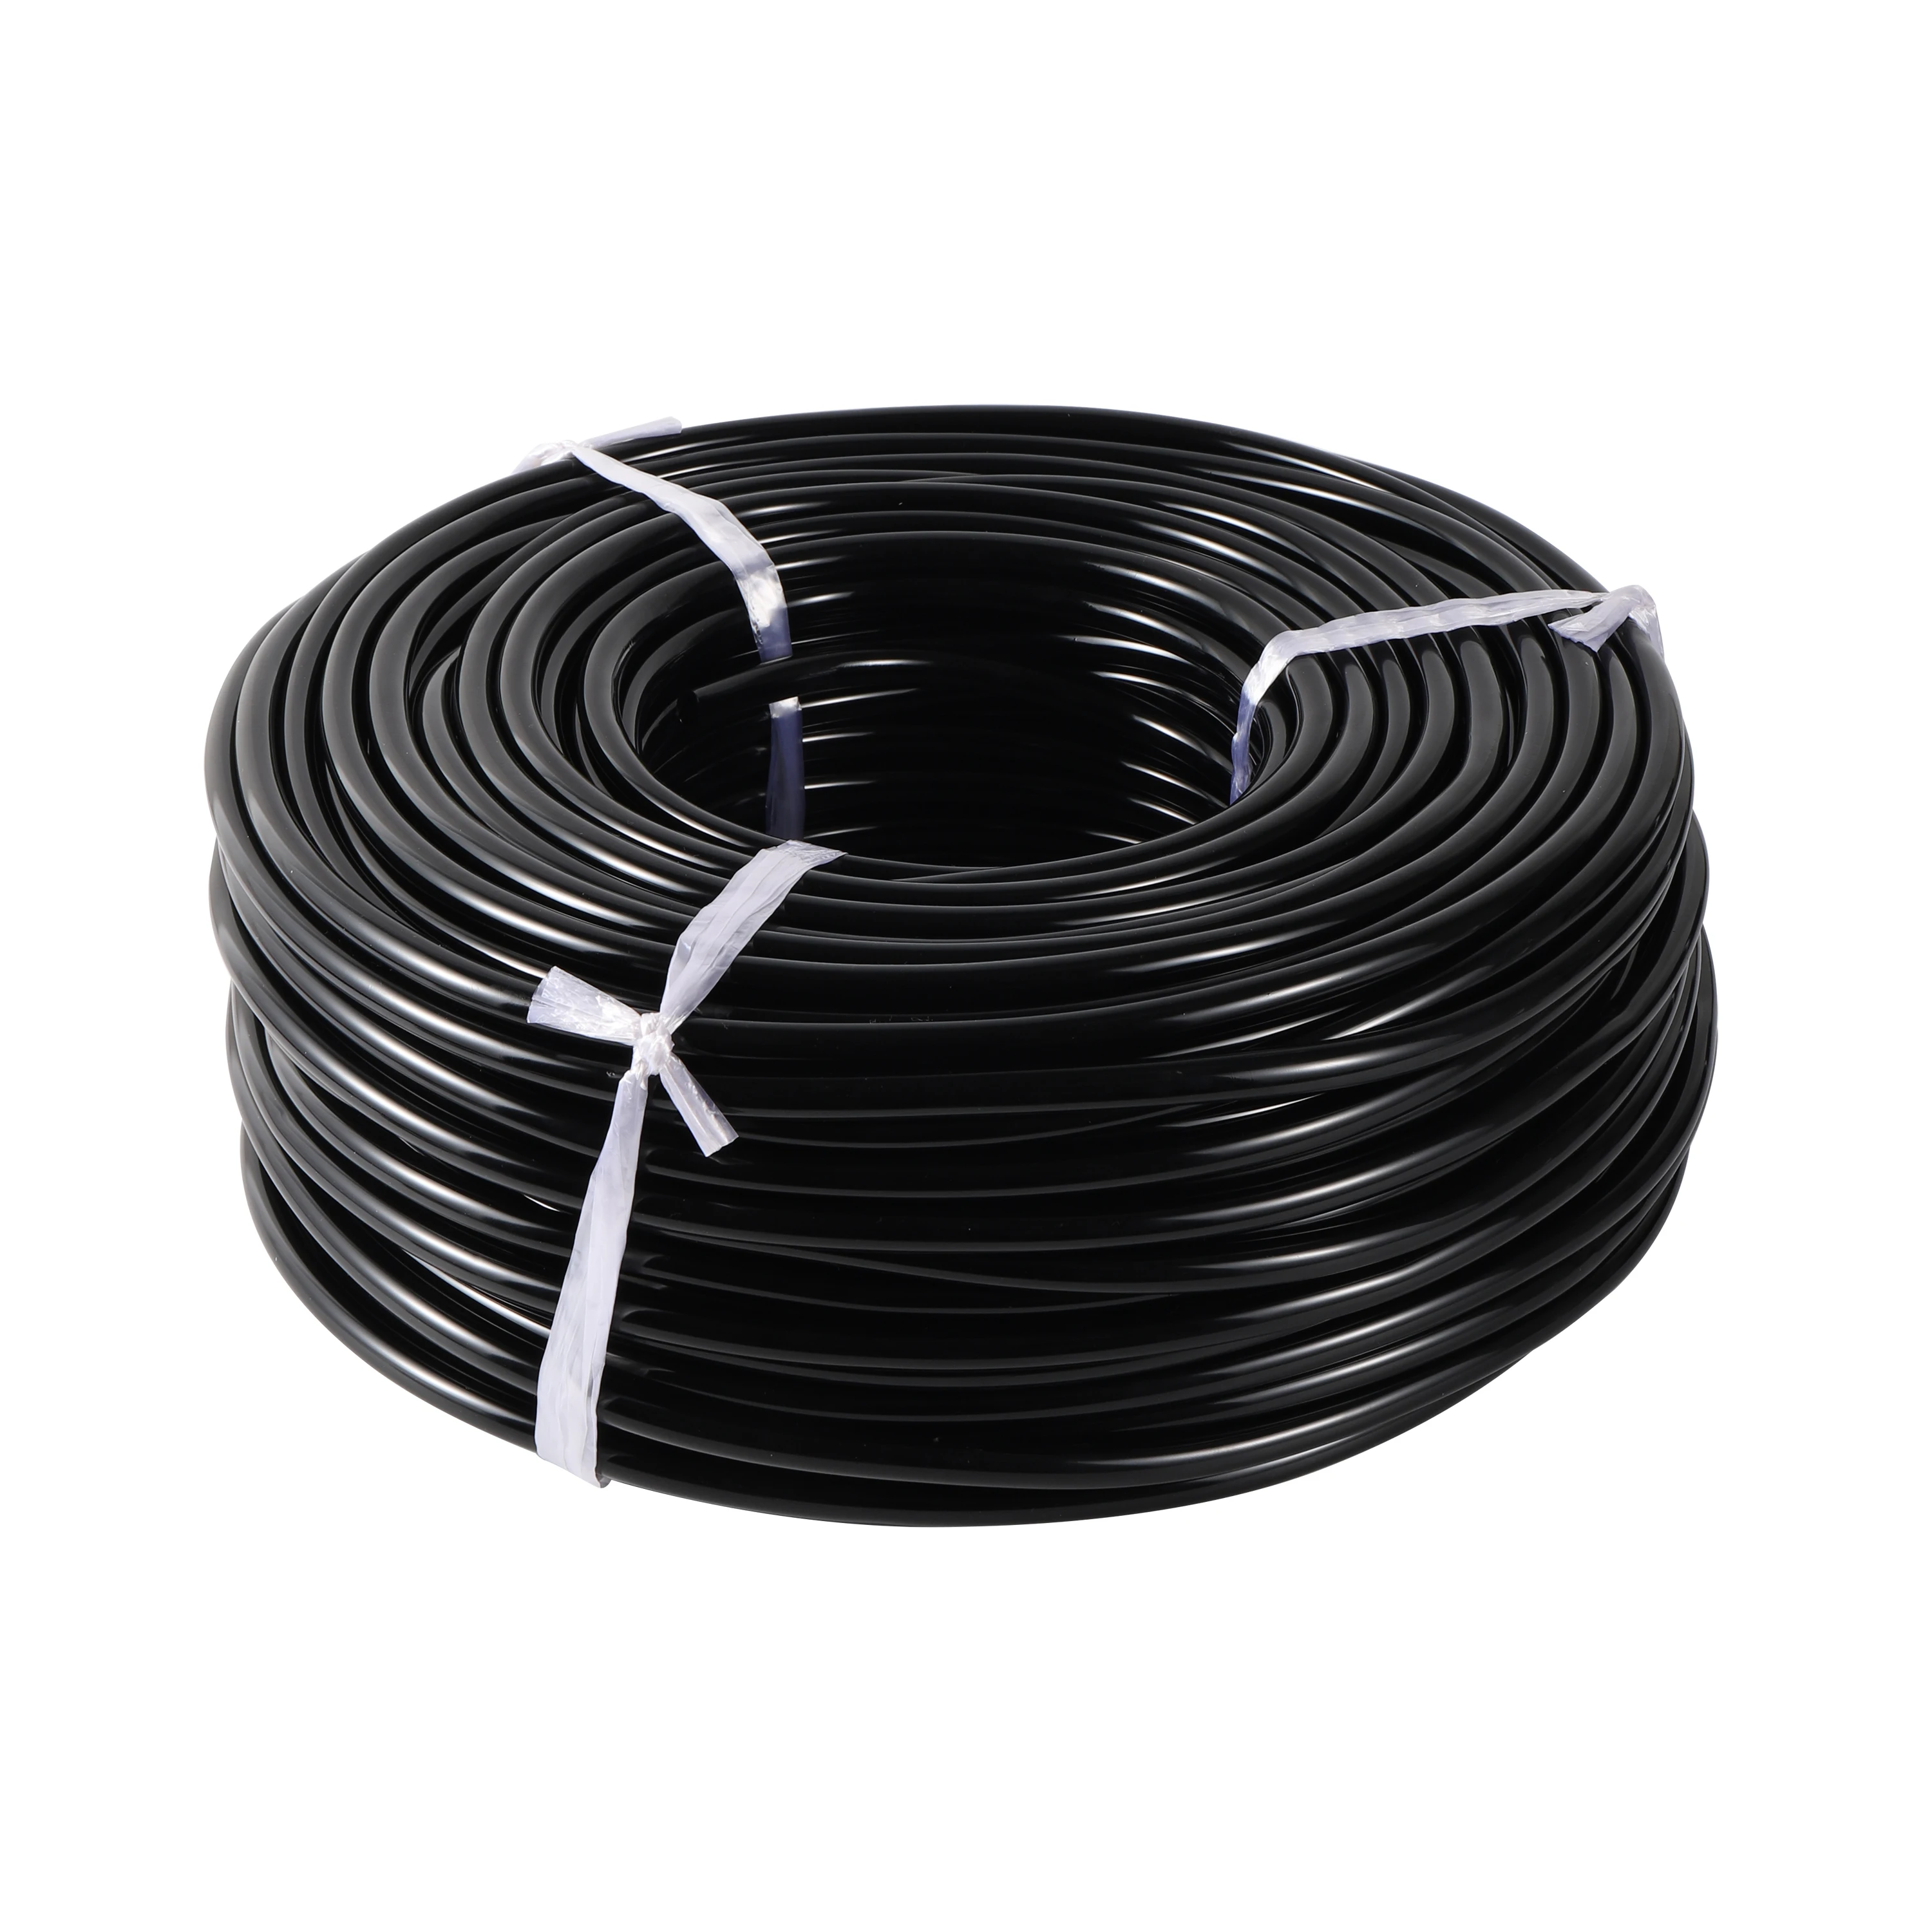 100m/Roll 8/11mm Hose Drip Watering System 3/8 Inch Pipe Garden Lawn Agriculture Plants Micro Irrigation Hoses